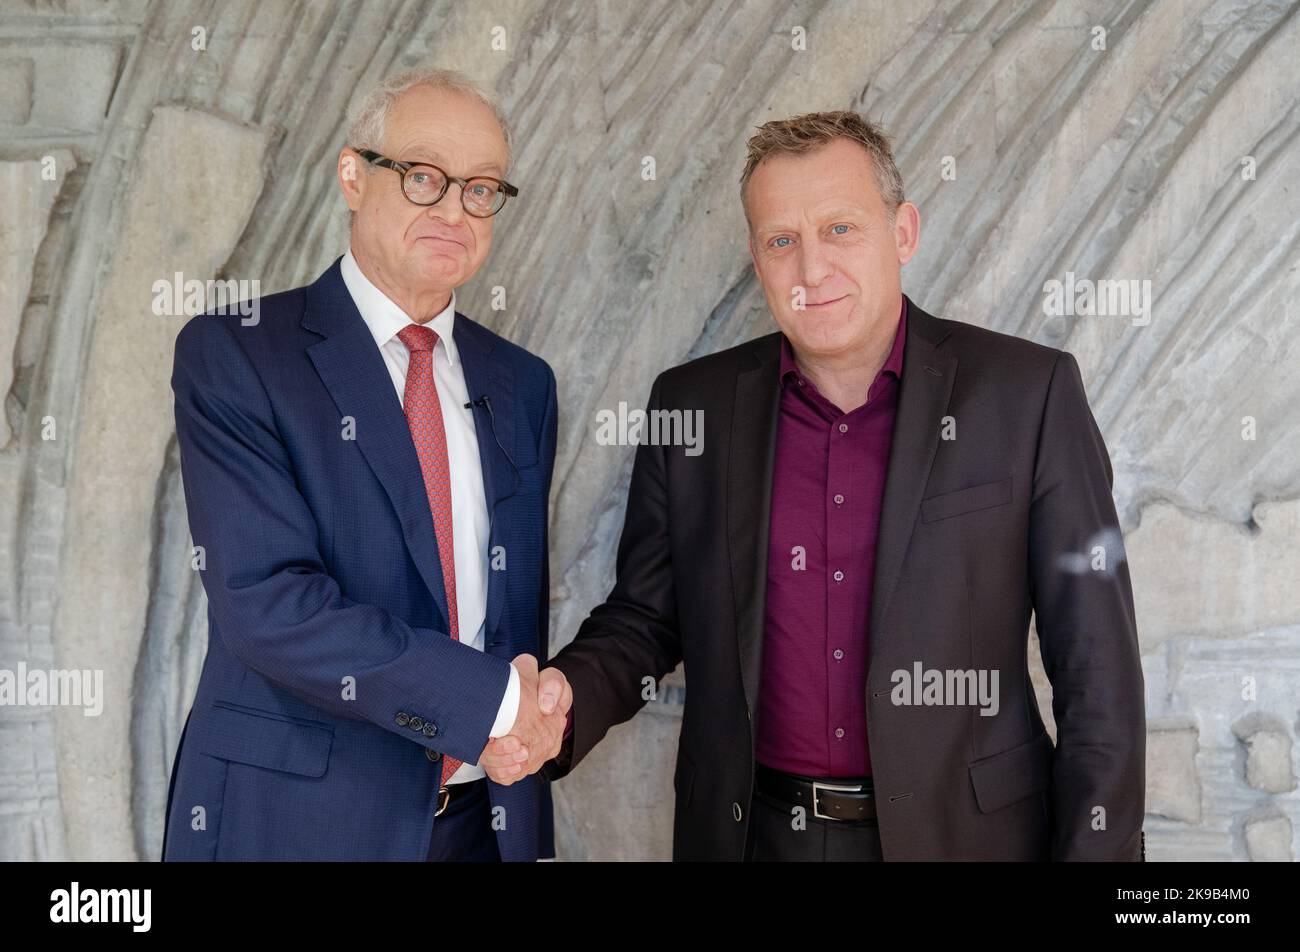 27 October 2022, Baden-Württemberg, Böblingen: Before the start of further collective bargaining in the metal and electrical industry, Harald Marquardt (l), negotiator for Südwestmetall, shakes hands with Roman Zitzelsberger, district manager and negotiator for IG Metall Baden-Württemberg. Photo: Christoph Schmidt/dpa Stock Photo